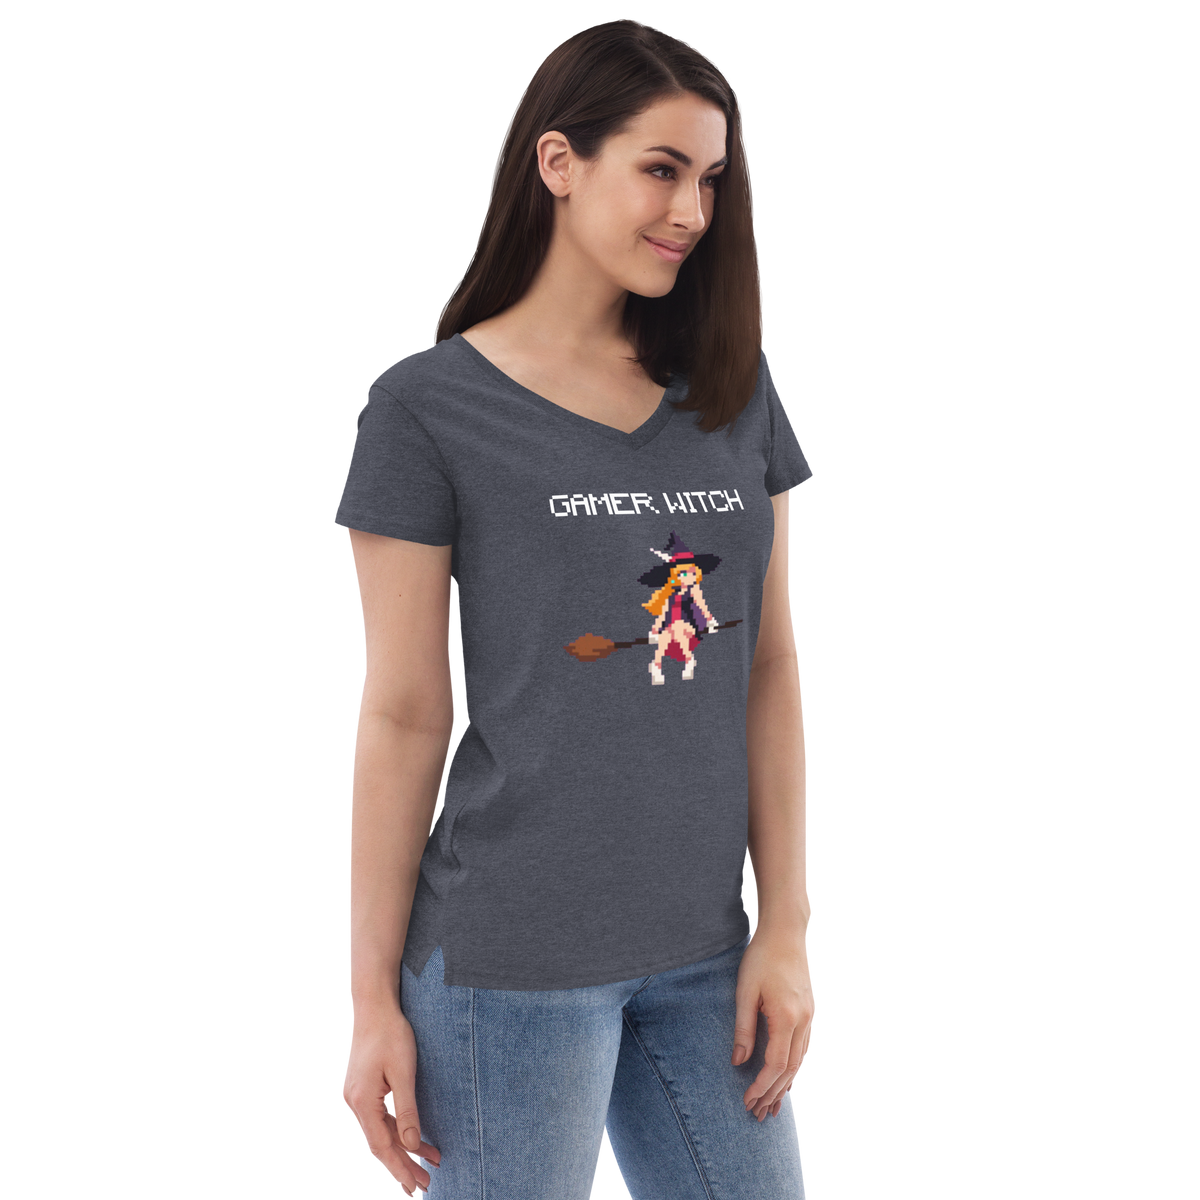 Gamer Witch V-Neck Recycled Tee